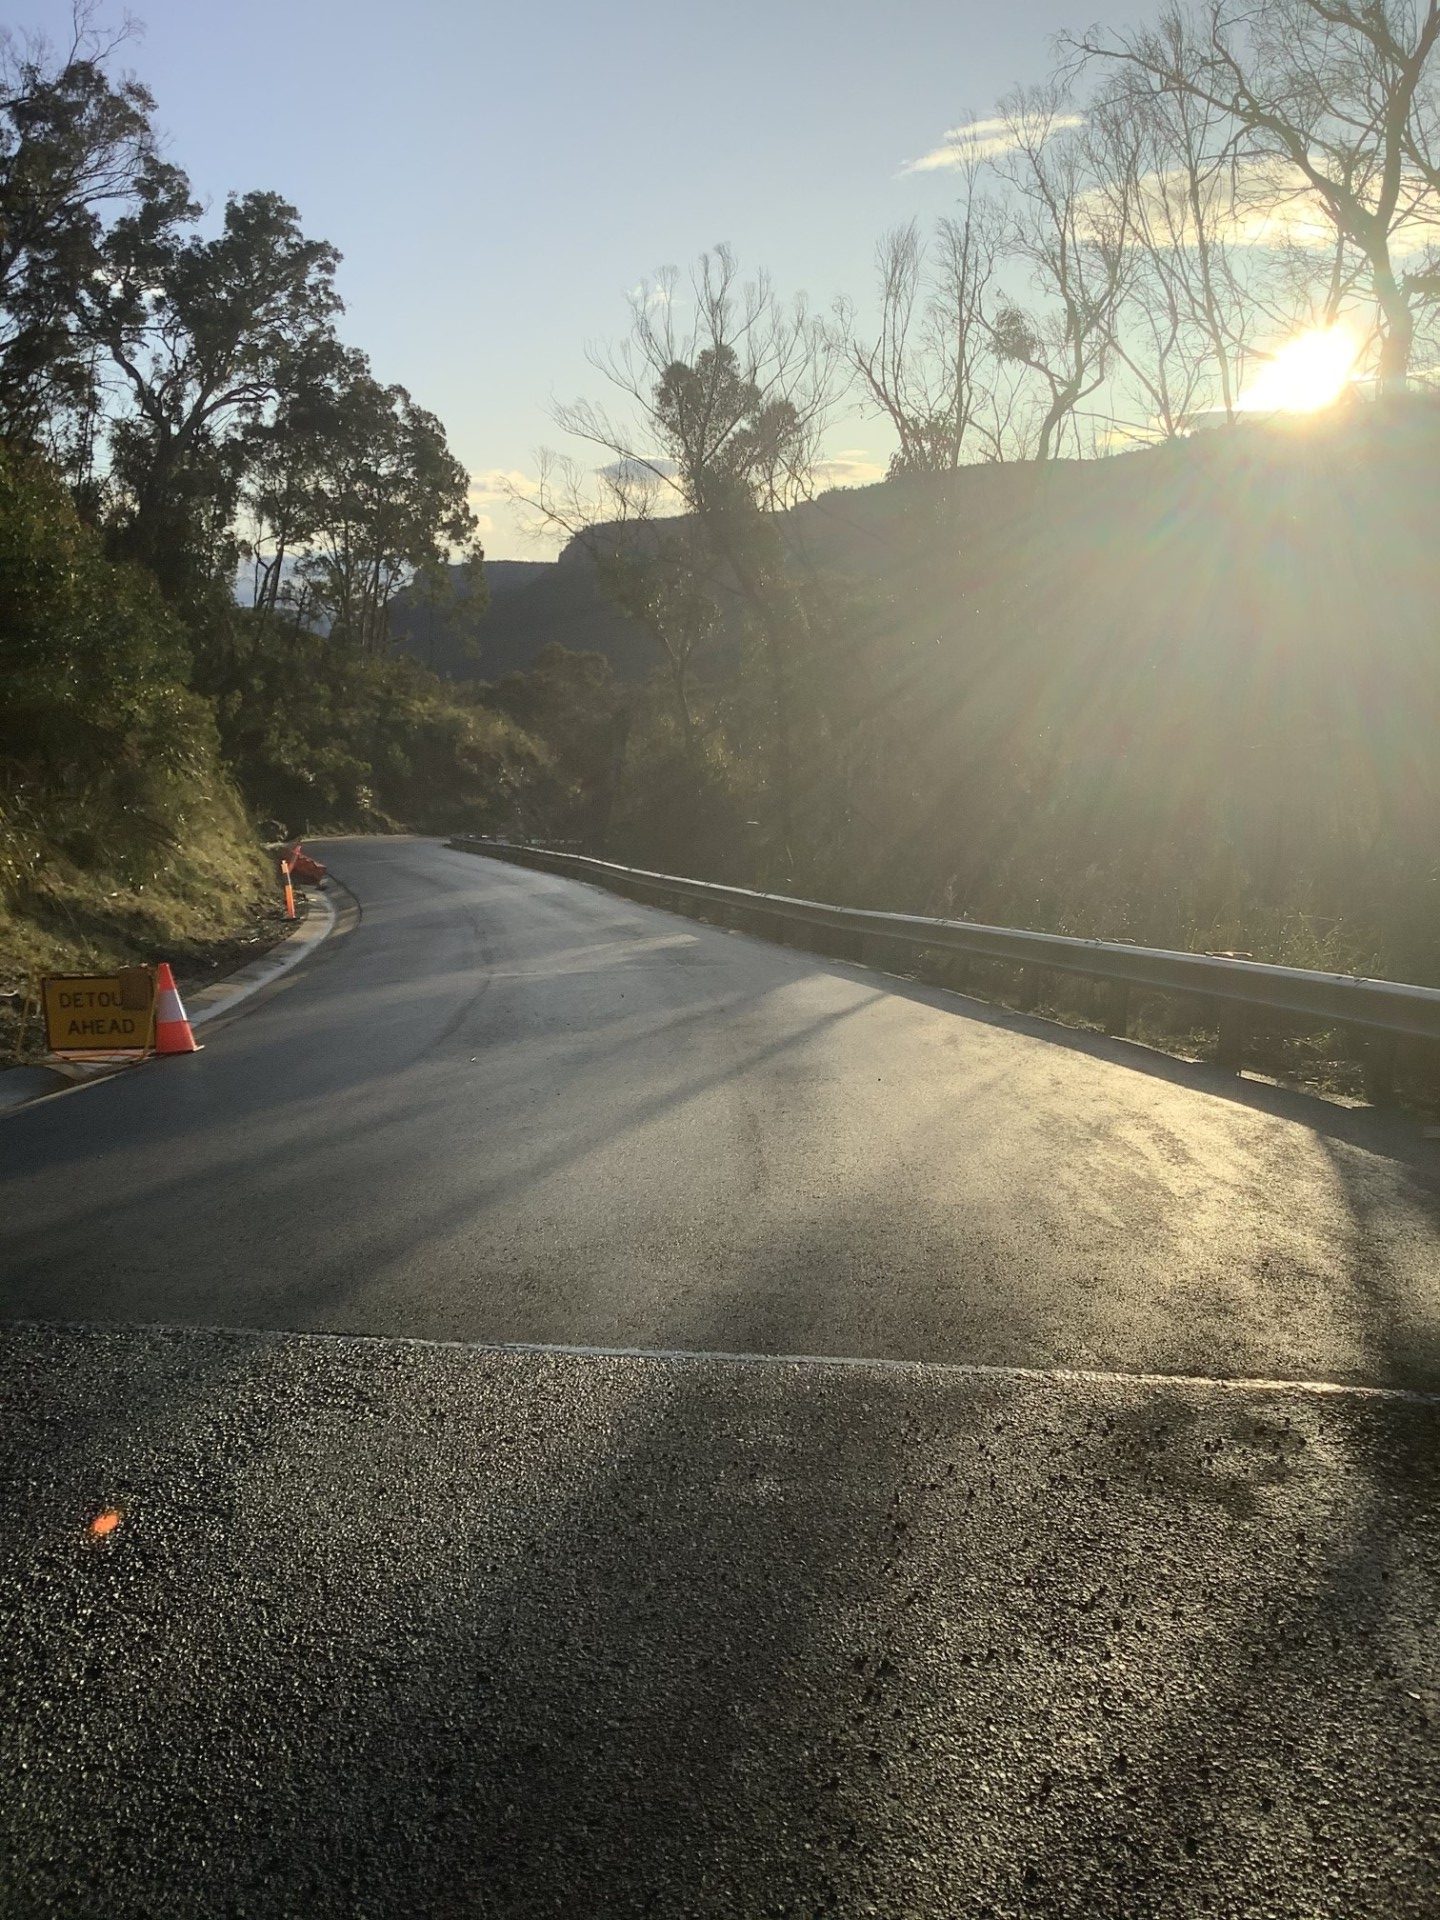 Land slip repairs to asphalt roadway, 500 tonnes inclusive of base course and wearing course layers – Wolgan Valley NSW